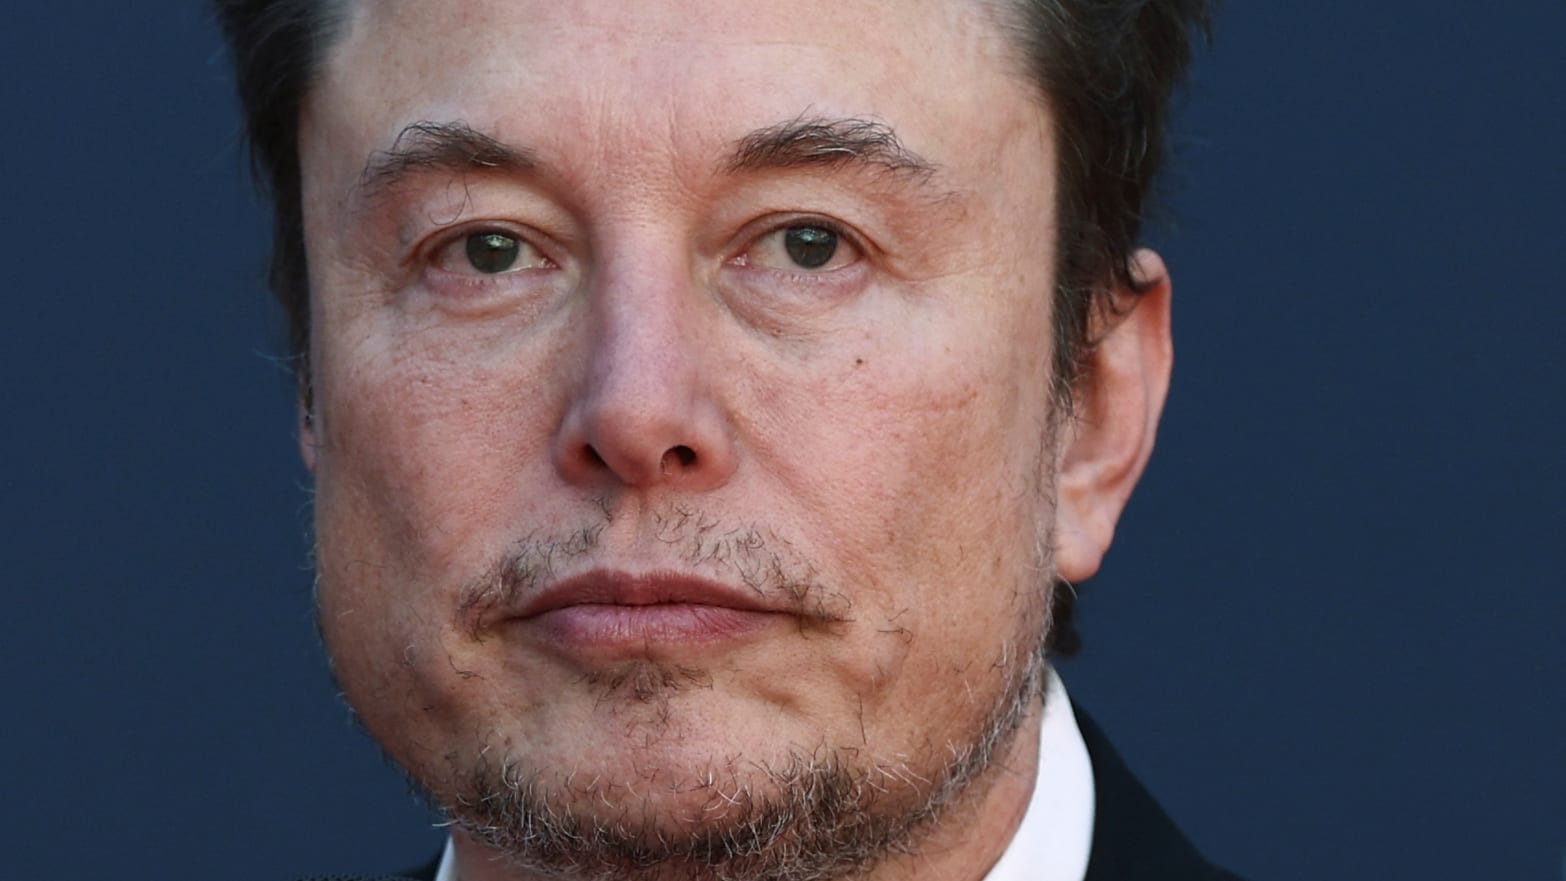 Elon Musk told Twitter Files journalist Matt Taibbi 'You are dead to me' in a text message amid their row over Substack. 